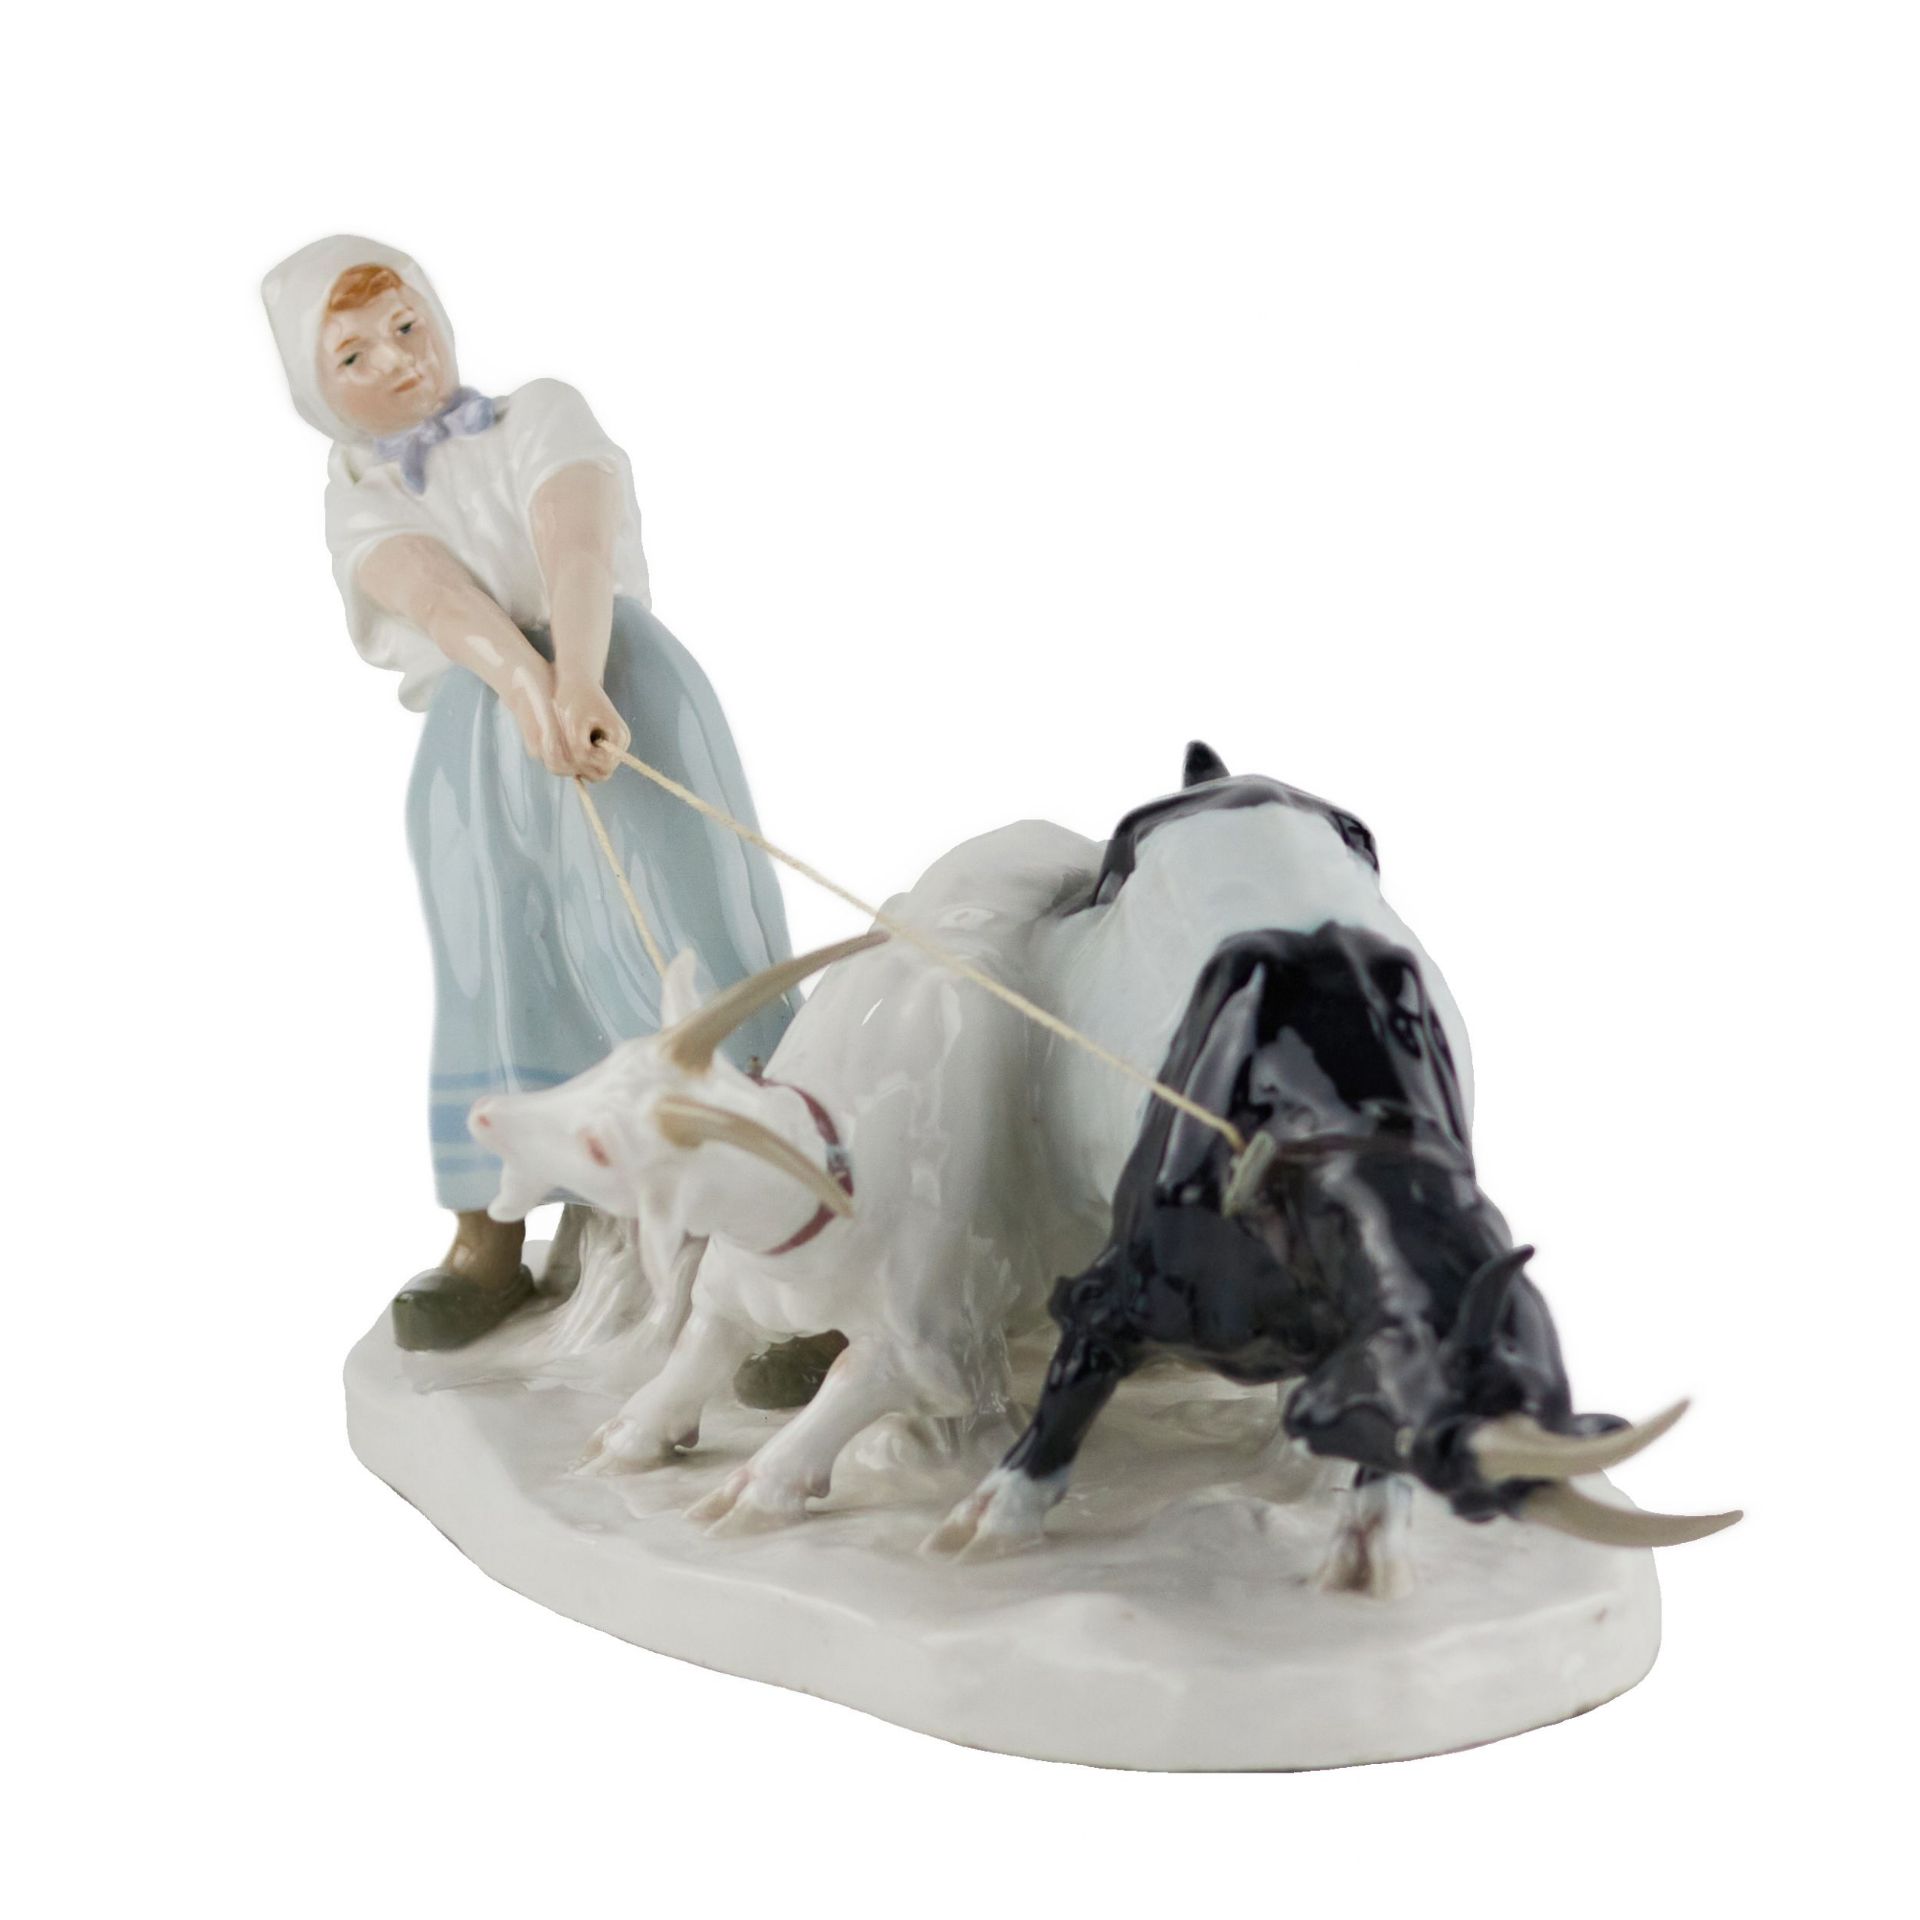 Porcelain composition Shepherdess with goats. Pilz, Otto. Meissen. 1850-1924. - Image 2 of 7